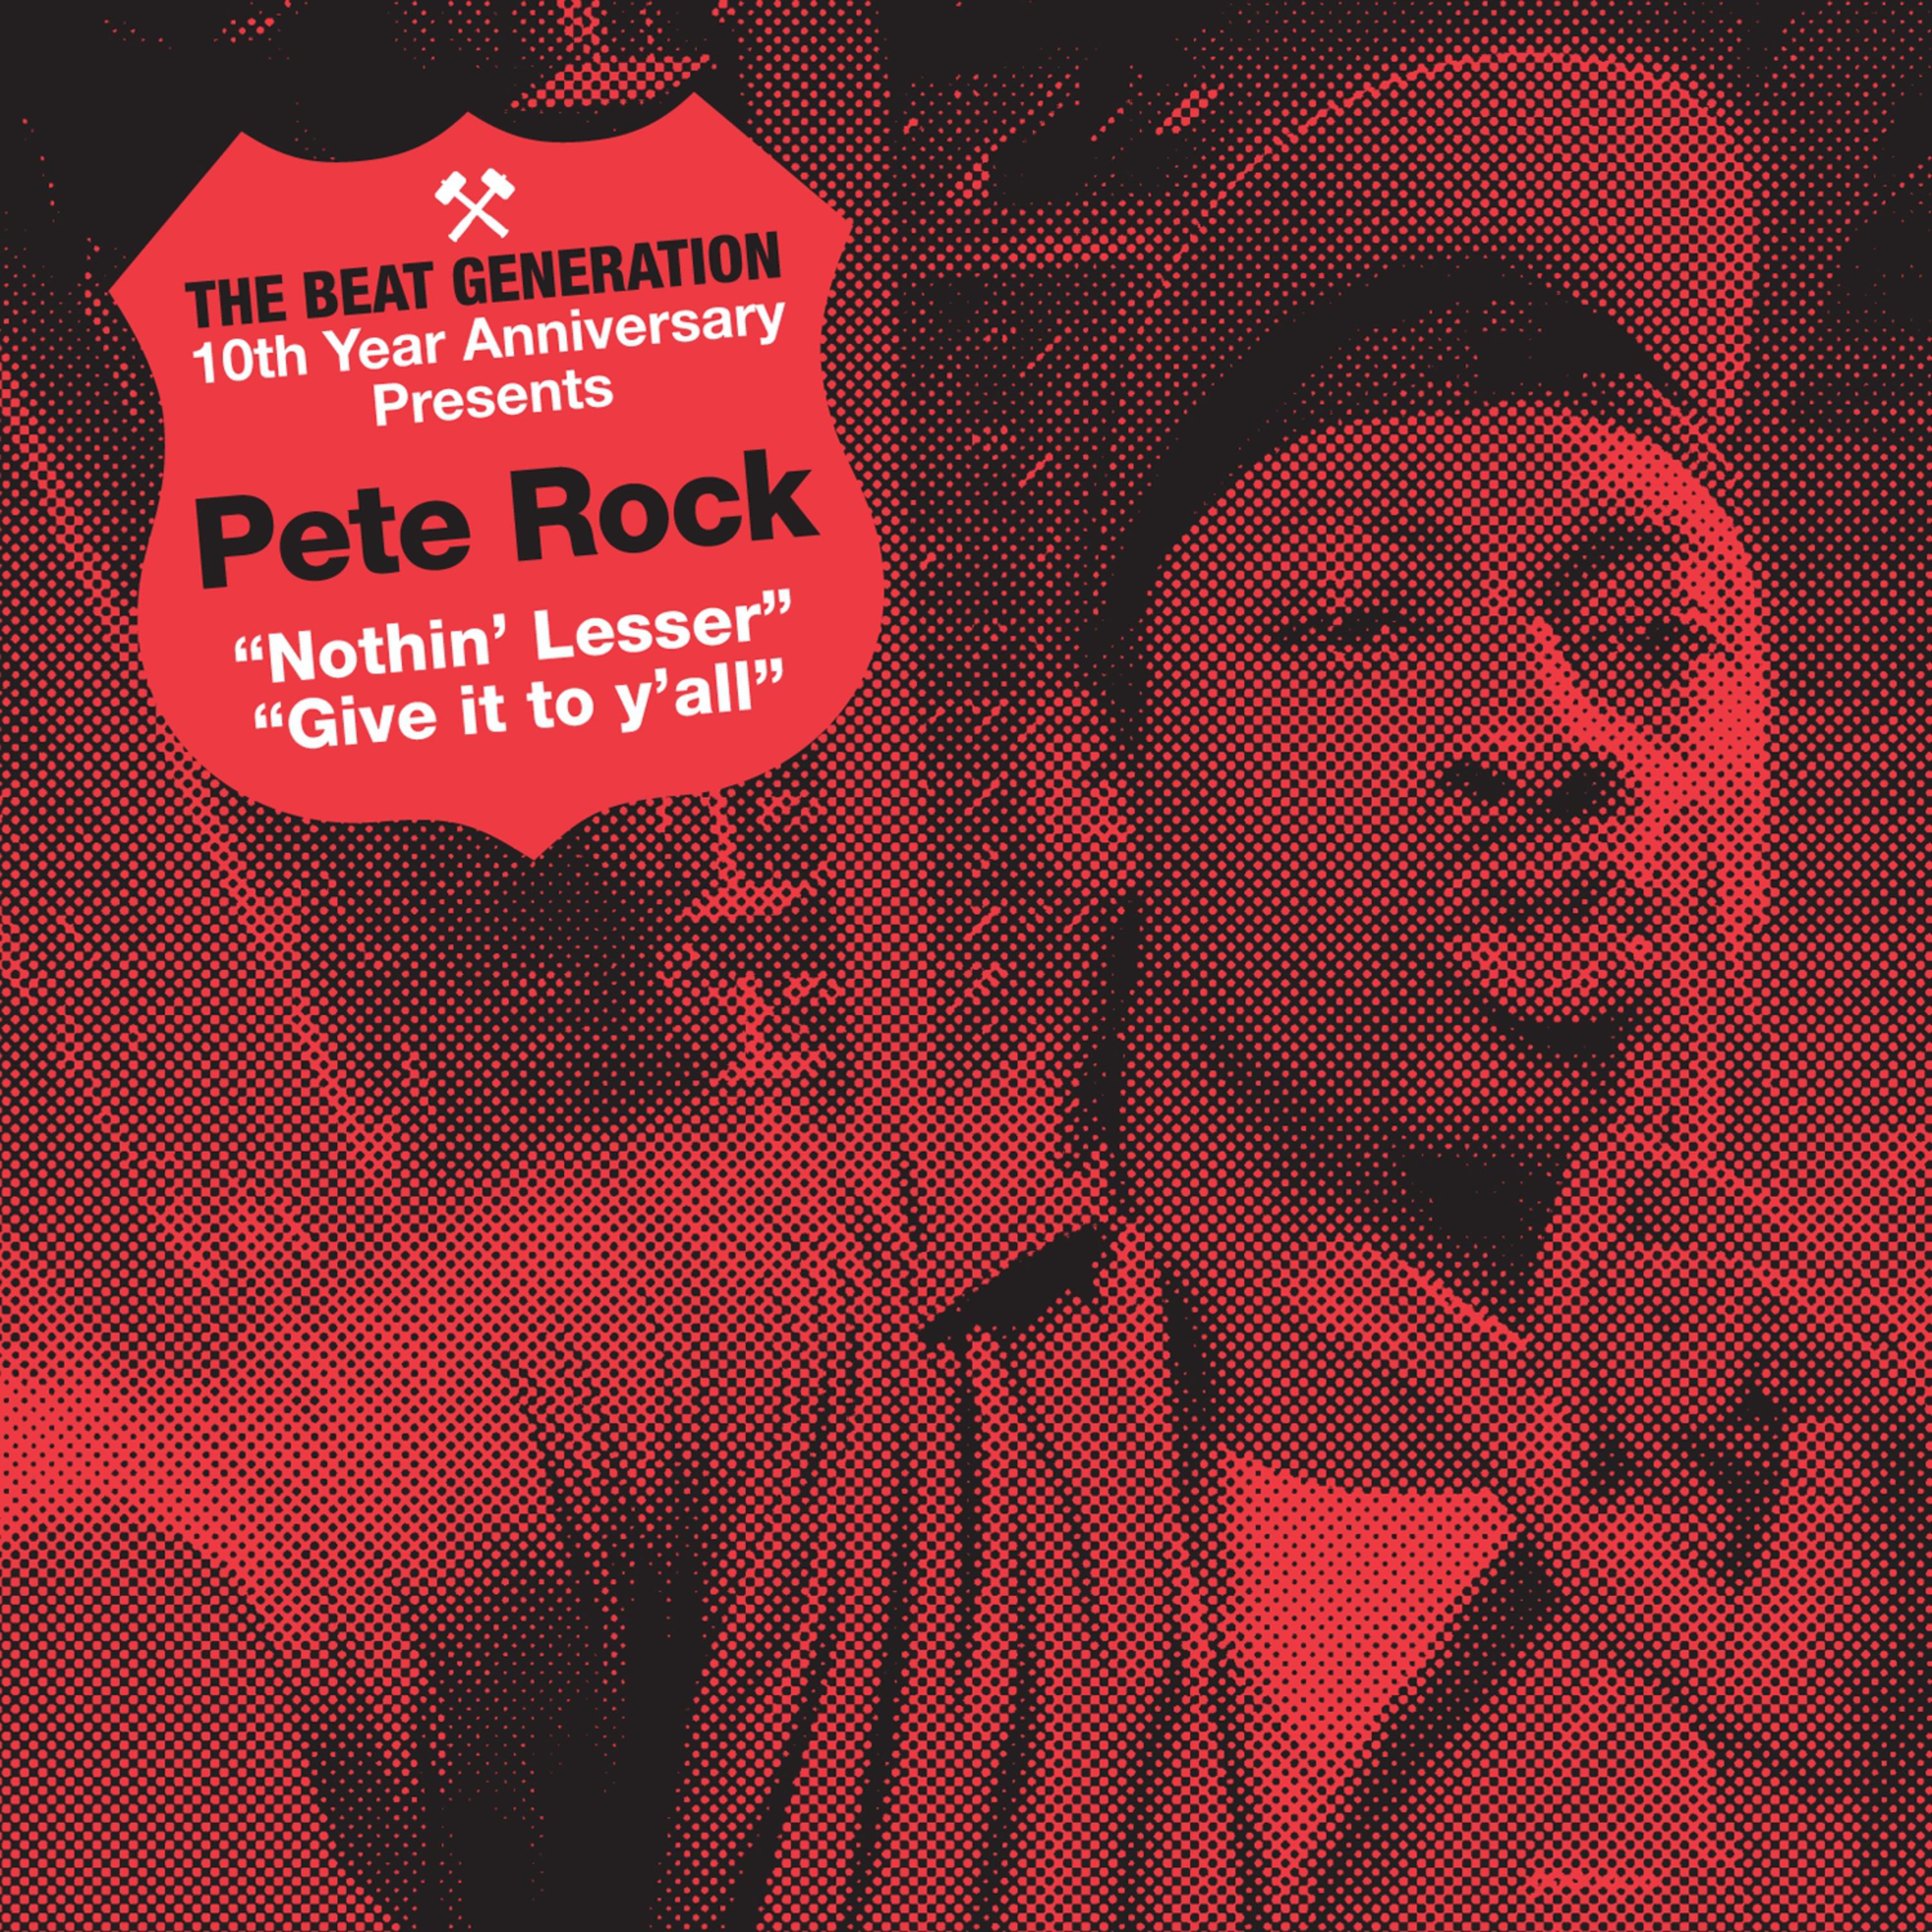 The Beat Generation 10th Anniversary Presents: Pete Rock - Nothin' Lesser B/w Give It To Y'all